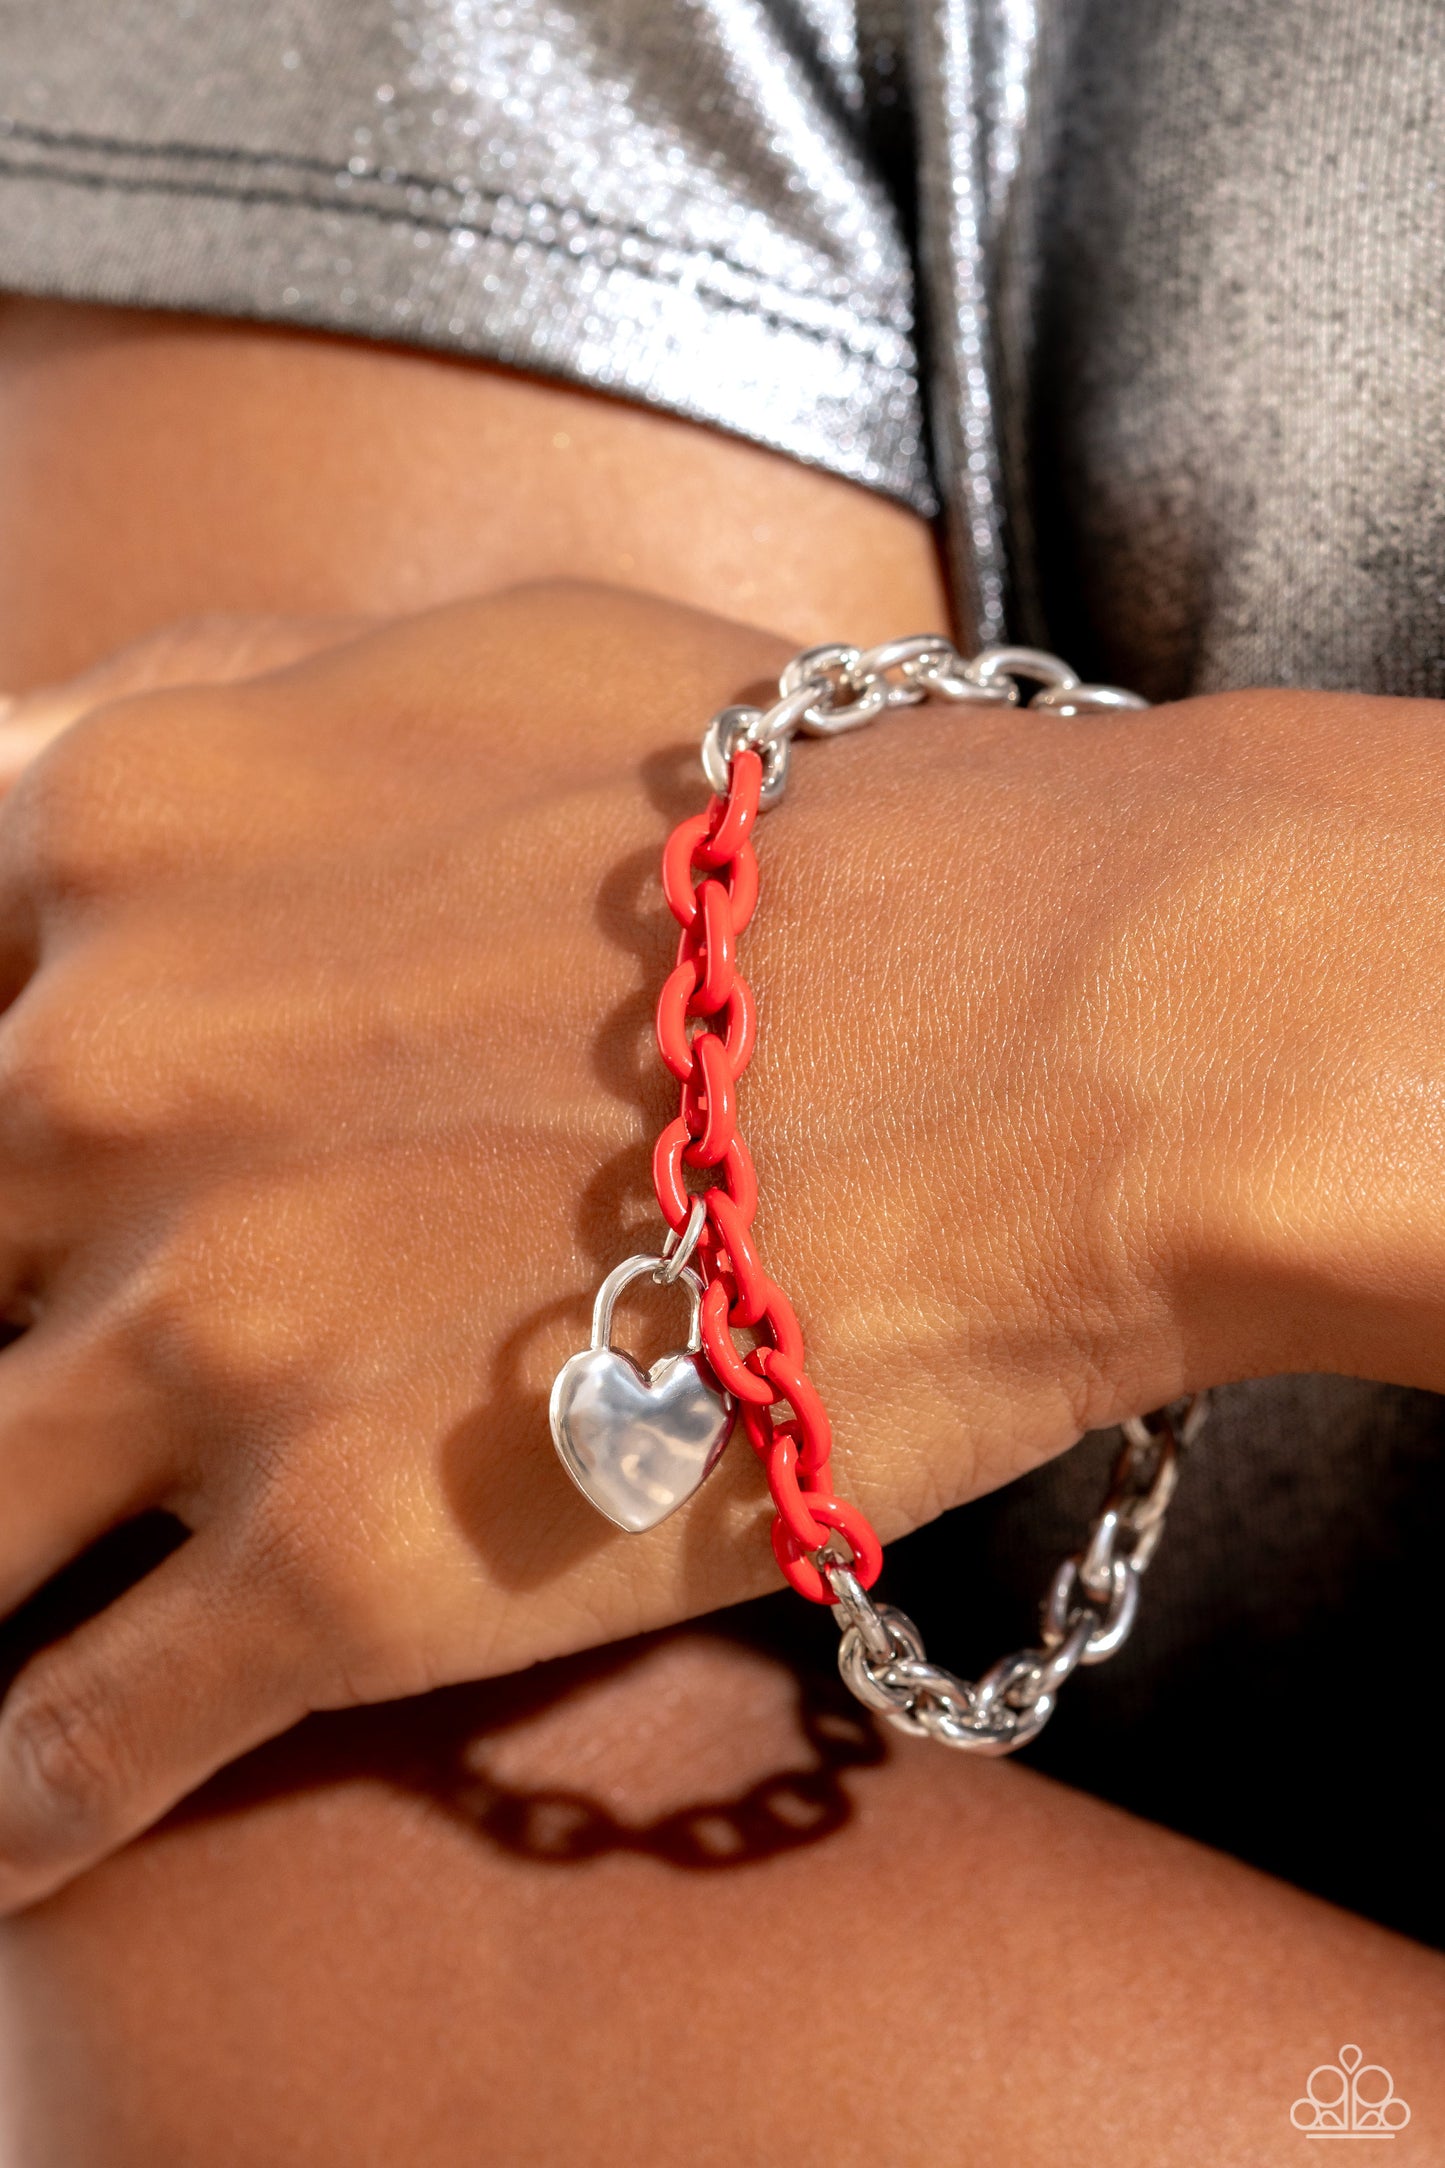 Locked and Loved Red Heart Toggle Bracelet - Paparazzi Accessories  Infused with splashes of red chain, a high-sheen silver chain dances around the wrist for a spunky industrial statement. A dainty hammered silver lock pendant graces the bottom of the bracelet, further infusing the design with a touch of romanticism. Features a toggle clasp closure.  Sold as one individual bracelet.  P9WH-RDXX-191PO